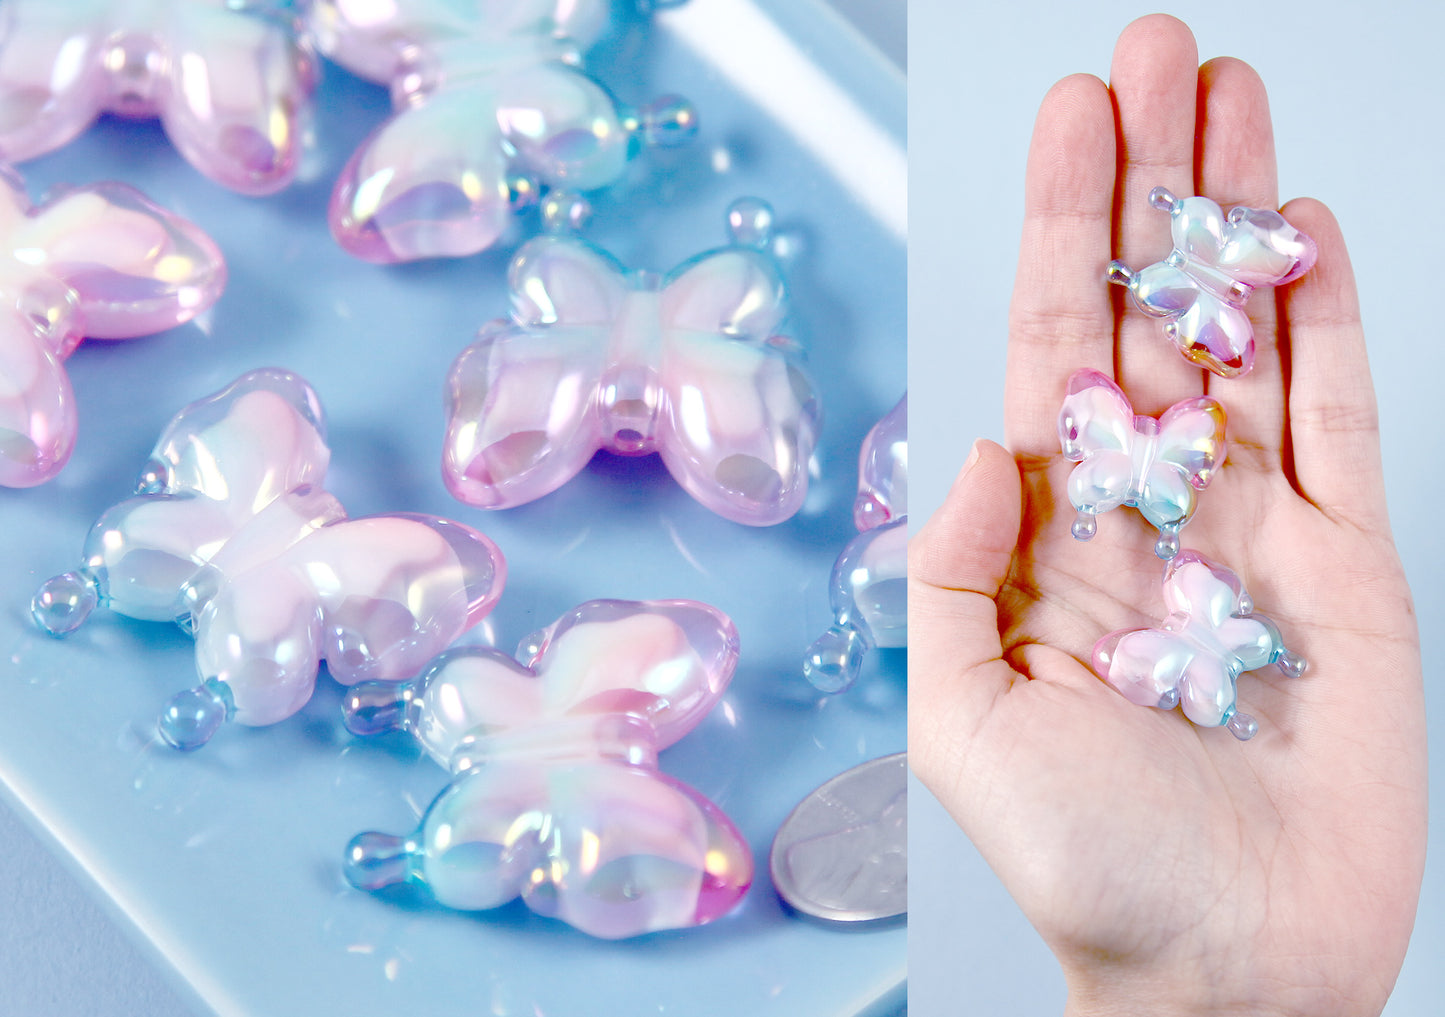 Butterfly Beads - 30mm Pastel Pink and Blue Gradient AB Butterfly Iridescent Acrylic Beads or Resin Beads - 6 pc set